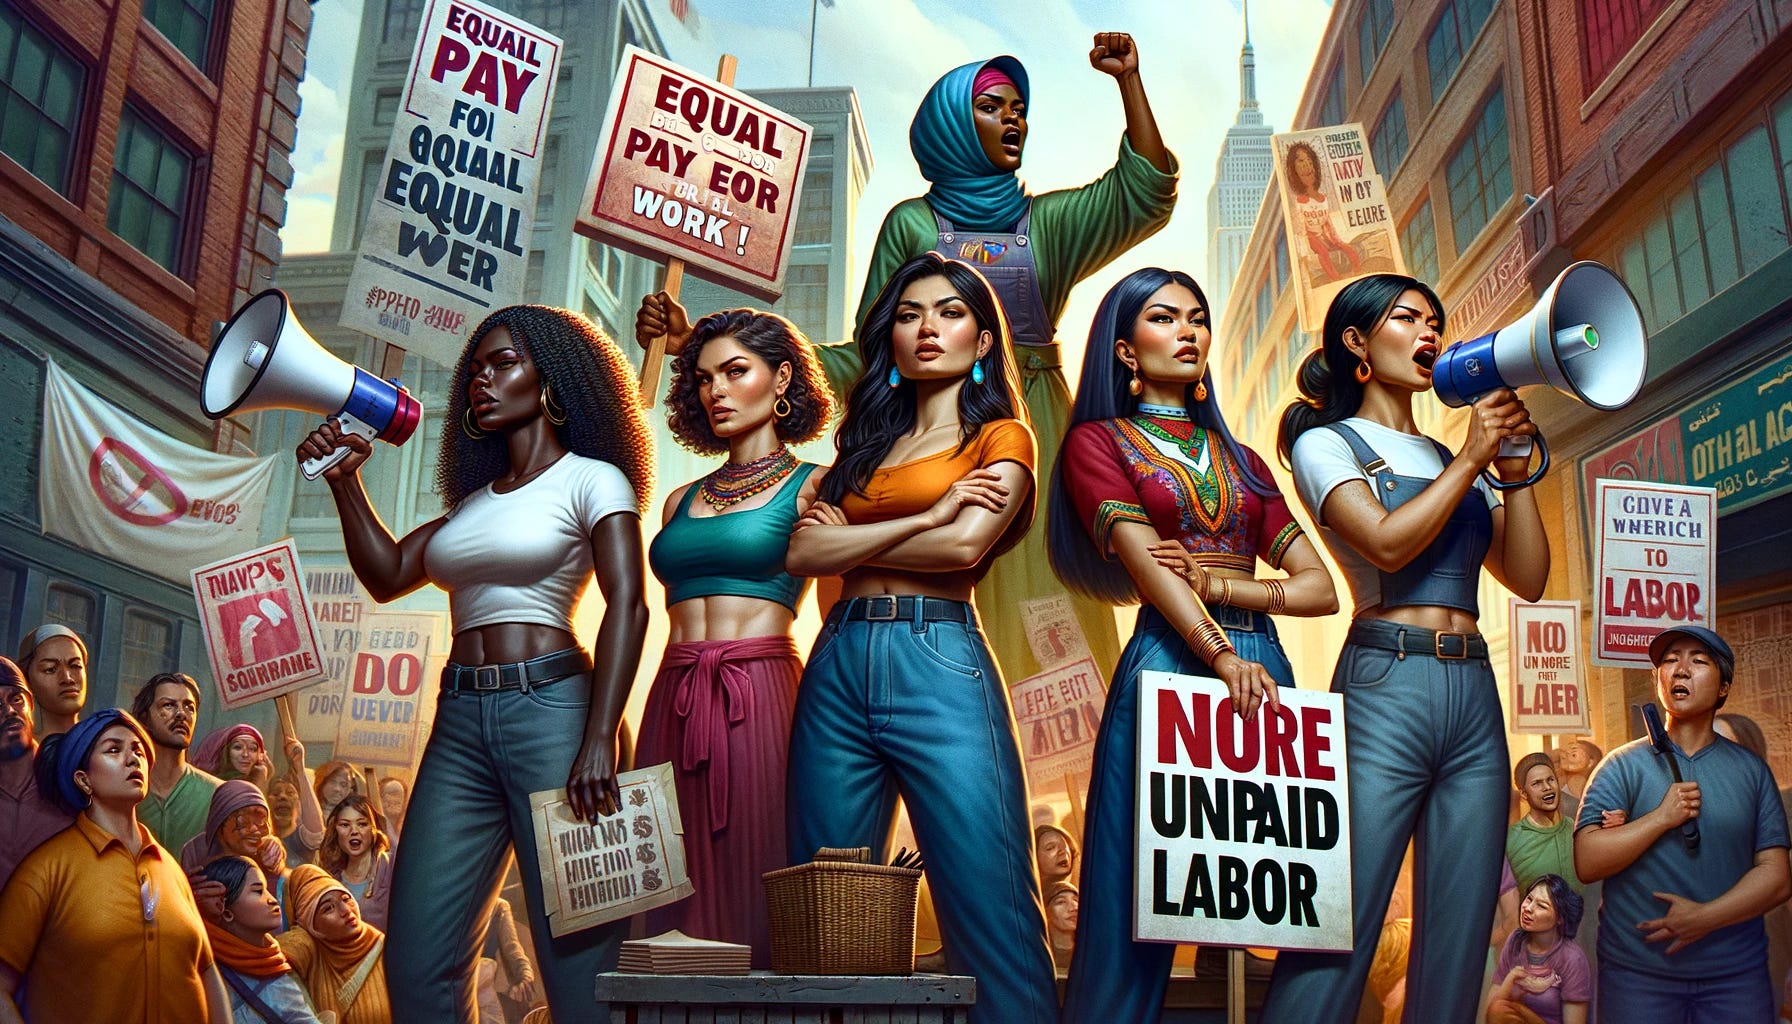 A powerful scene depicting women of diverse backgrounds standing together in solidarity, refusing to do unpaid labor. The scene includes a Black woman holding a sign that reads 'Equal Pay for Equal Work', a Hispanic woman with her arms crossed, exuding confidence, a Middle-Eastern woman holding a megaphone, passionately advocating for fair compensation, and an Asian woman with a determined expression, holding a placard that says 'No More Unpaid Labor'. The background is a vibrant urban setting with banners and posters supporting their cause.